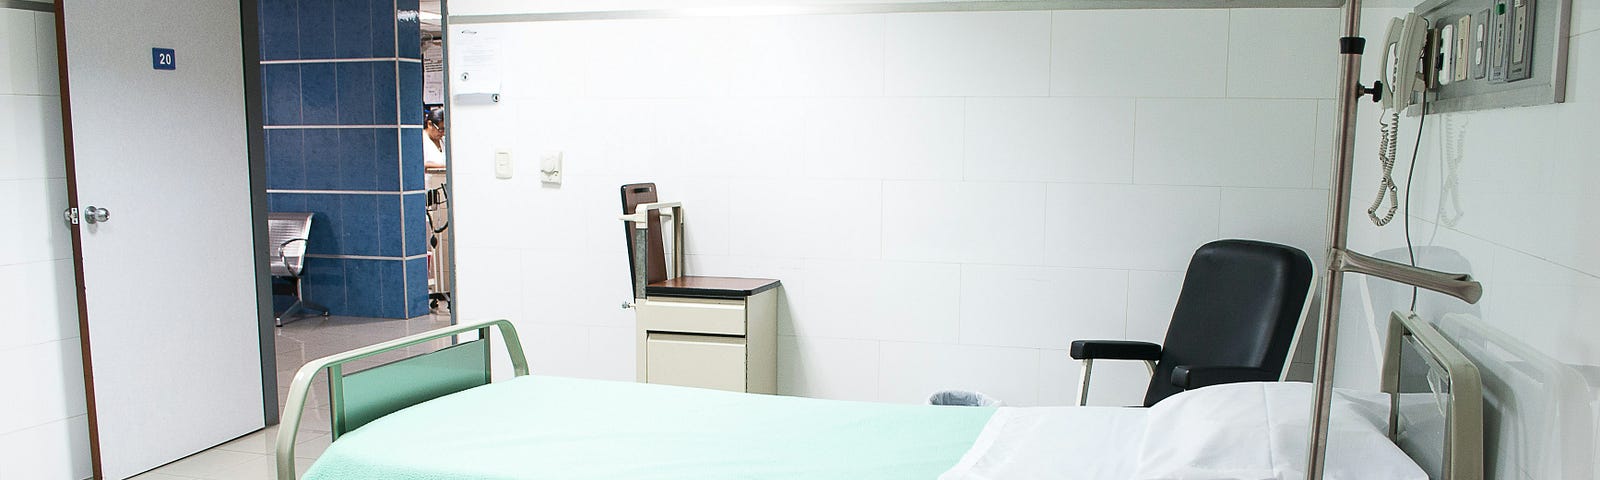 White room with a hospital gurney, a chair and some medical supplies.